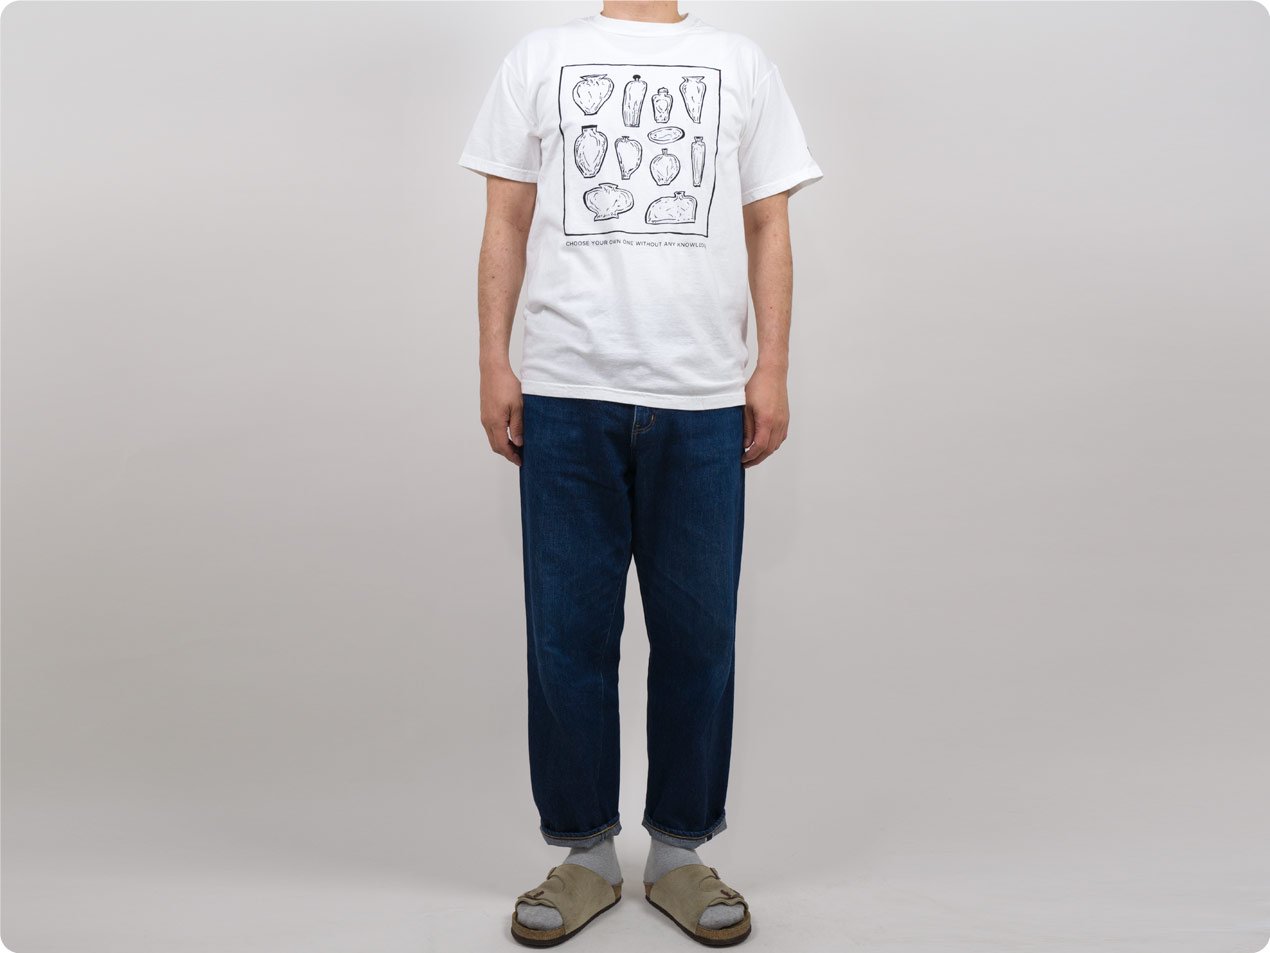 ENDS and MEANS Choose Print Tee WHITE